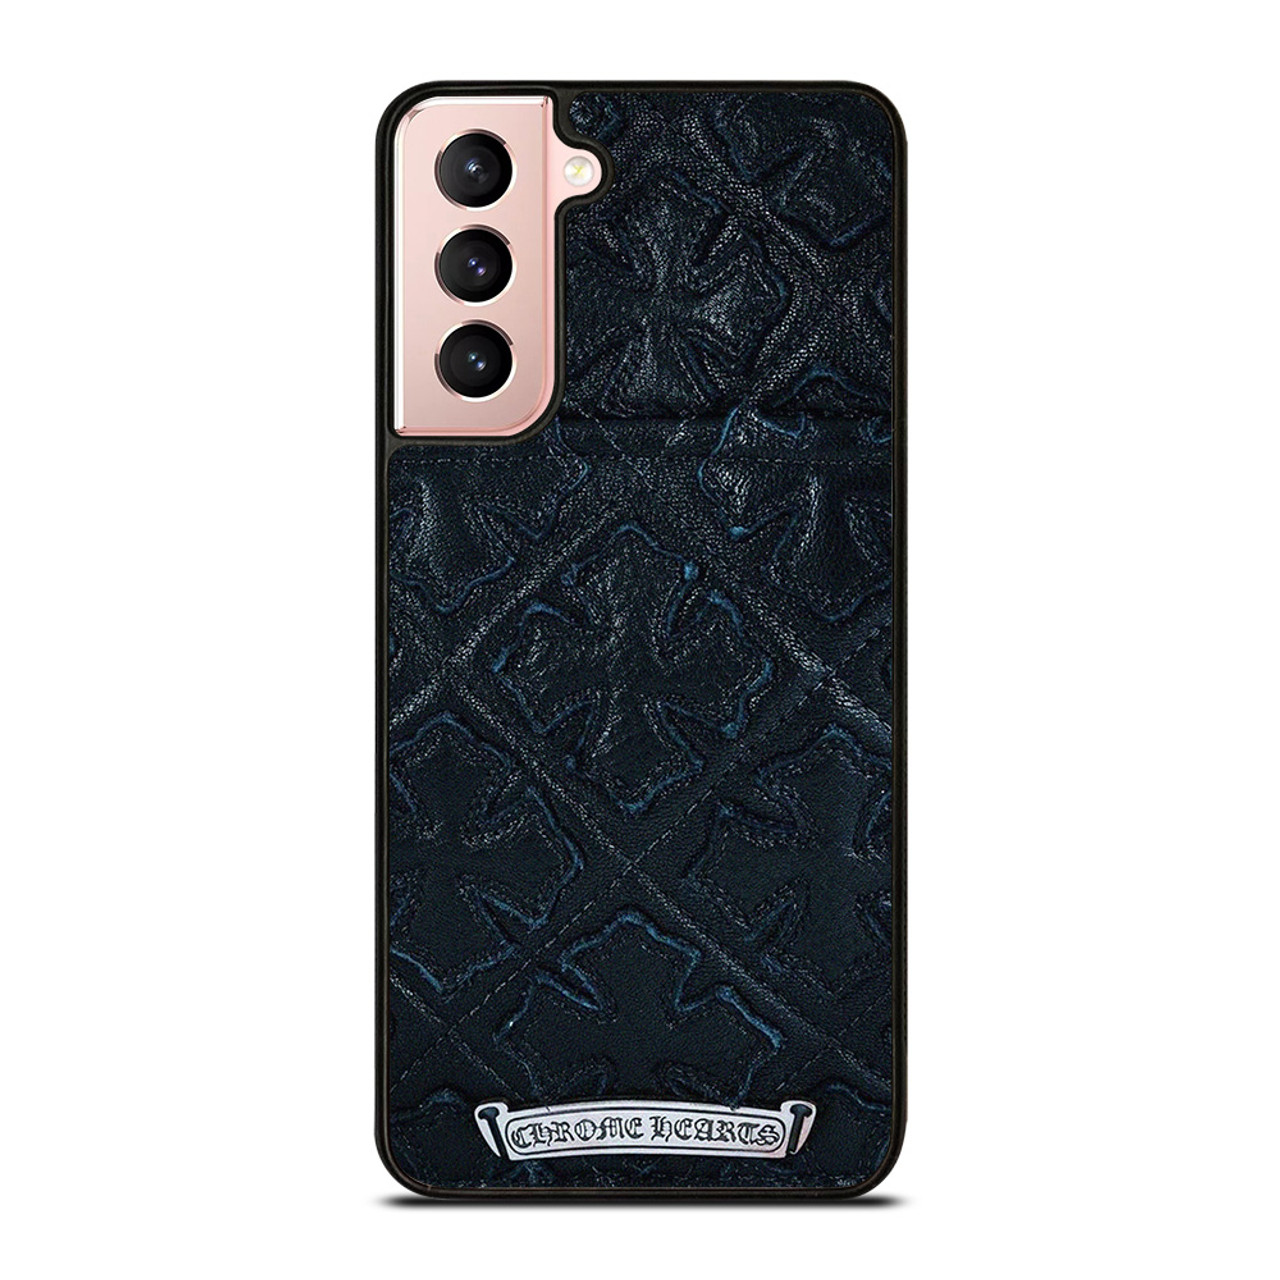 Louis Vuitton Ultra Thin Leather Hard Case for Samsung Galaxy S23 S22 Ultra  S21 Plus S20 Note 10 Plus Note 20 Ultra - Louis Vuitton Case